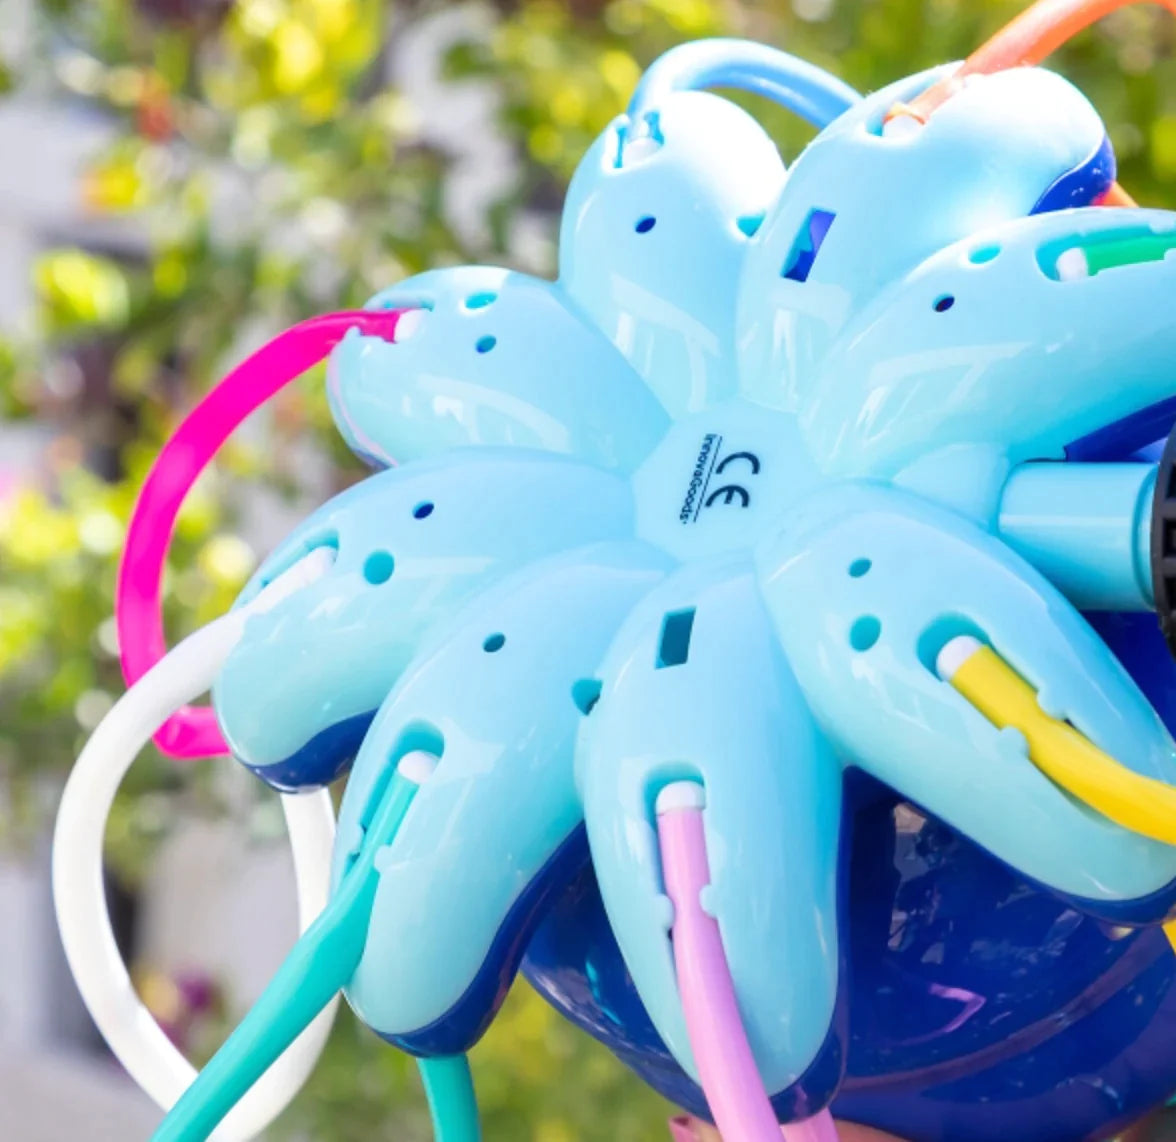 The funny octopus The ultimate sprinkler and sprayer for children 